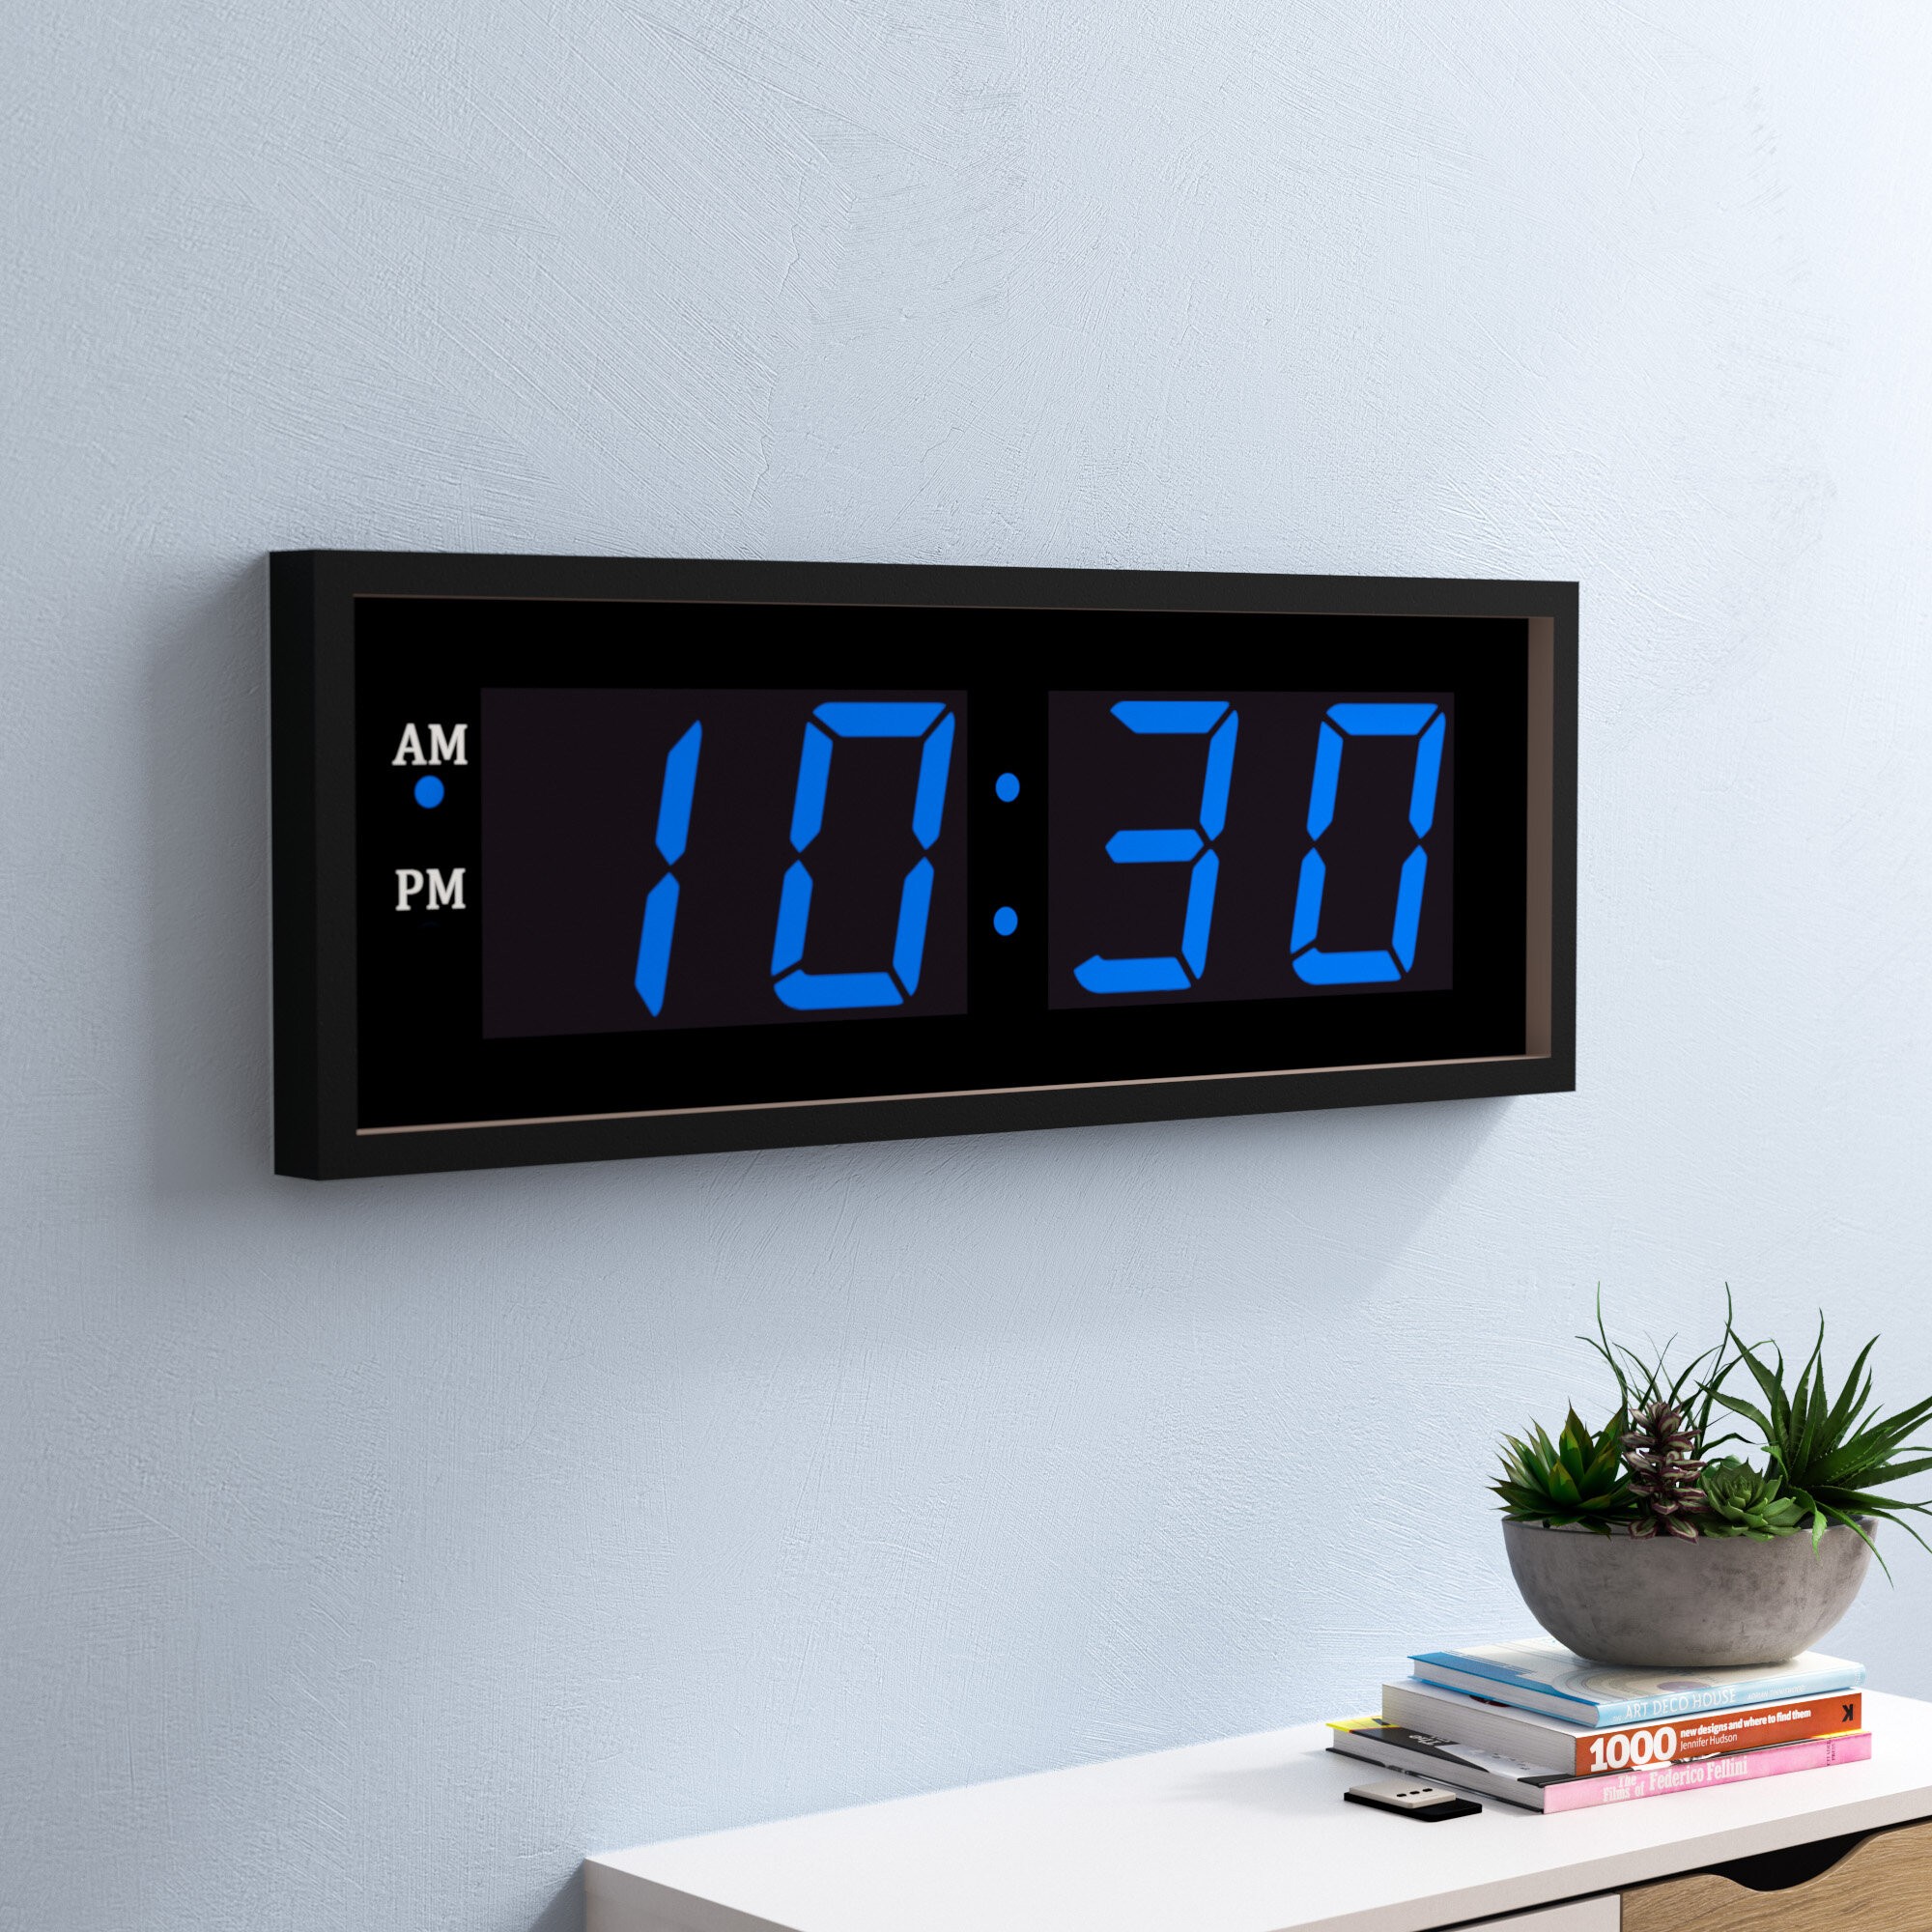 Electronic Led Digital Desk Clocks Wall Decorative Extra Large 4 LED Numbers Display,Only time function,Military Time